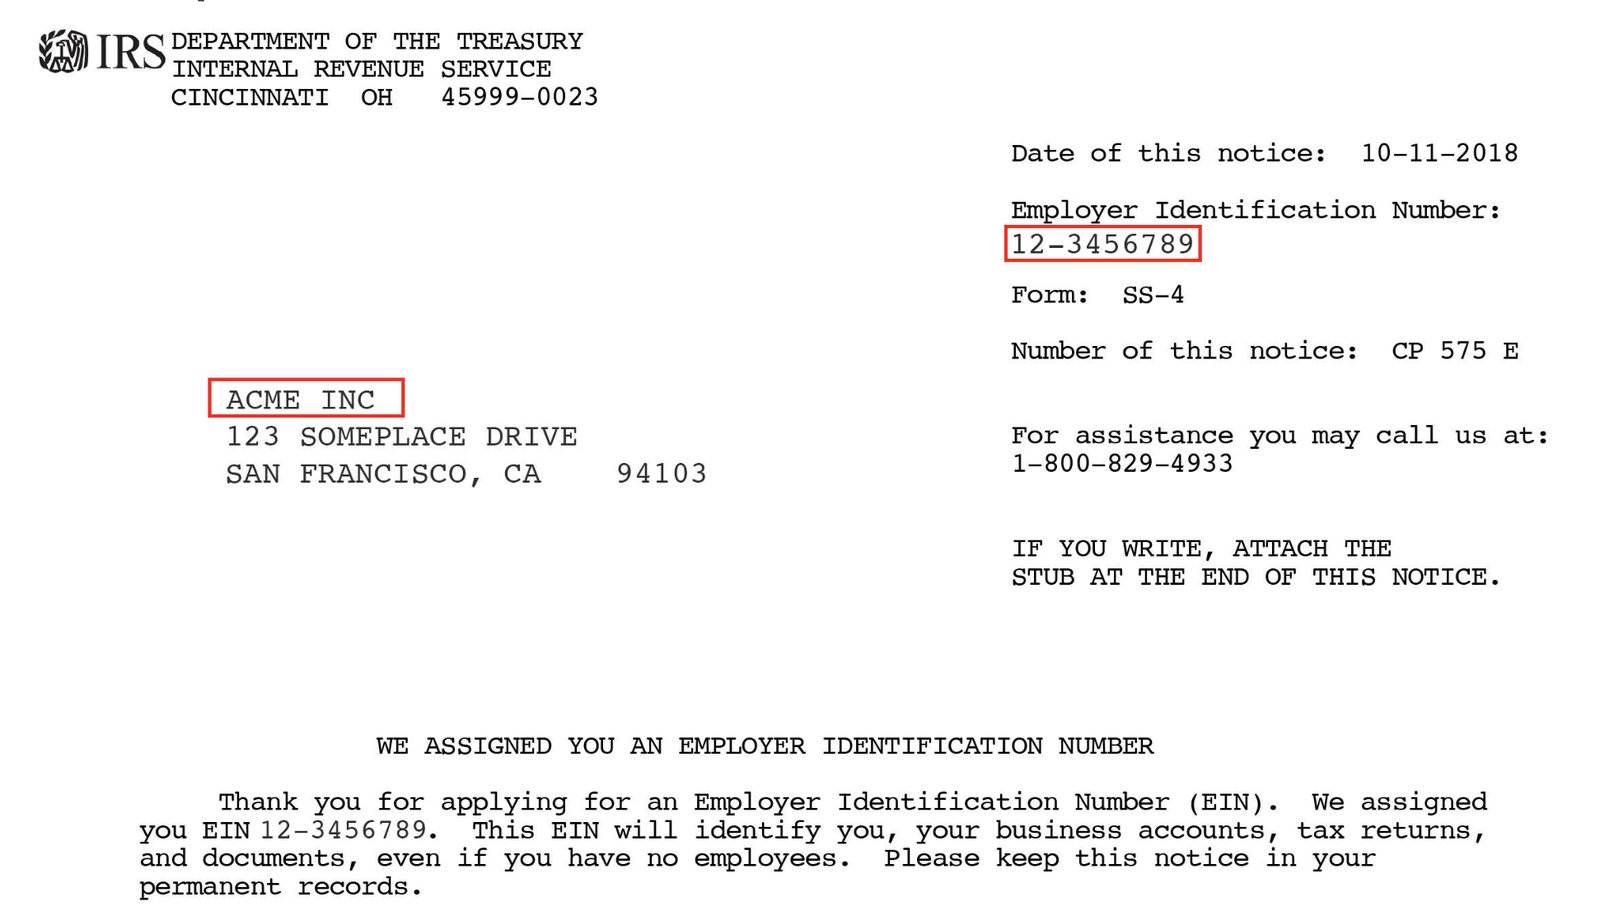 Sample CP575 letter showing assigned EIN and business name and address.